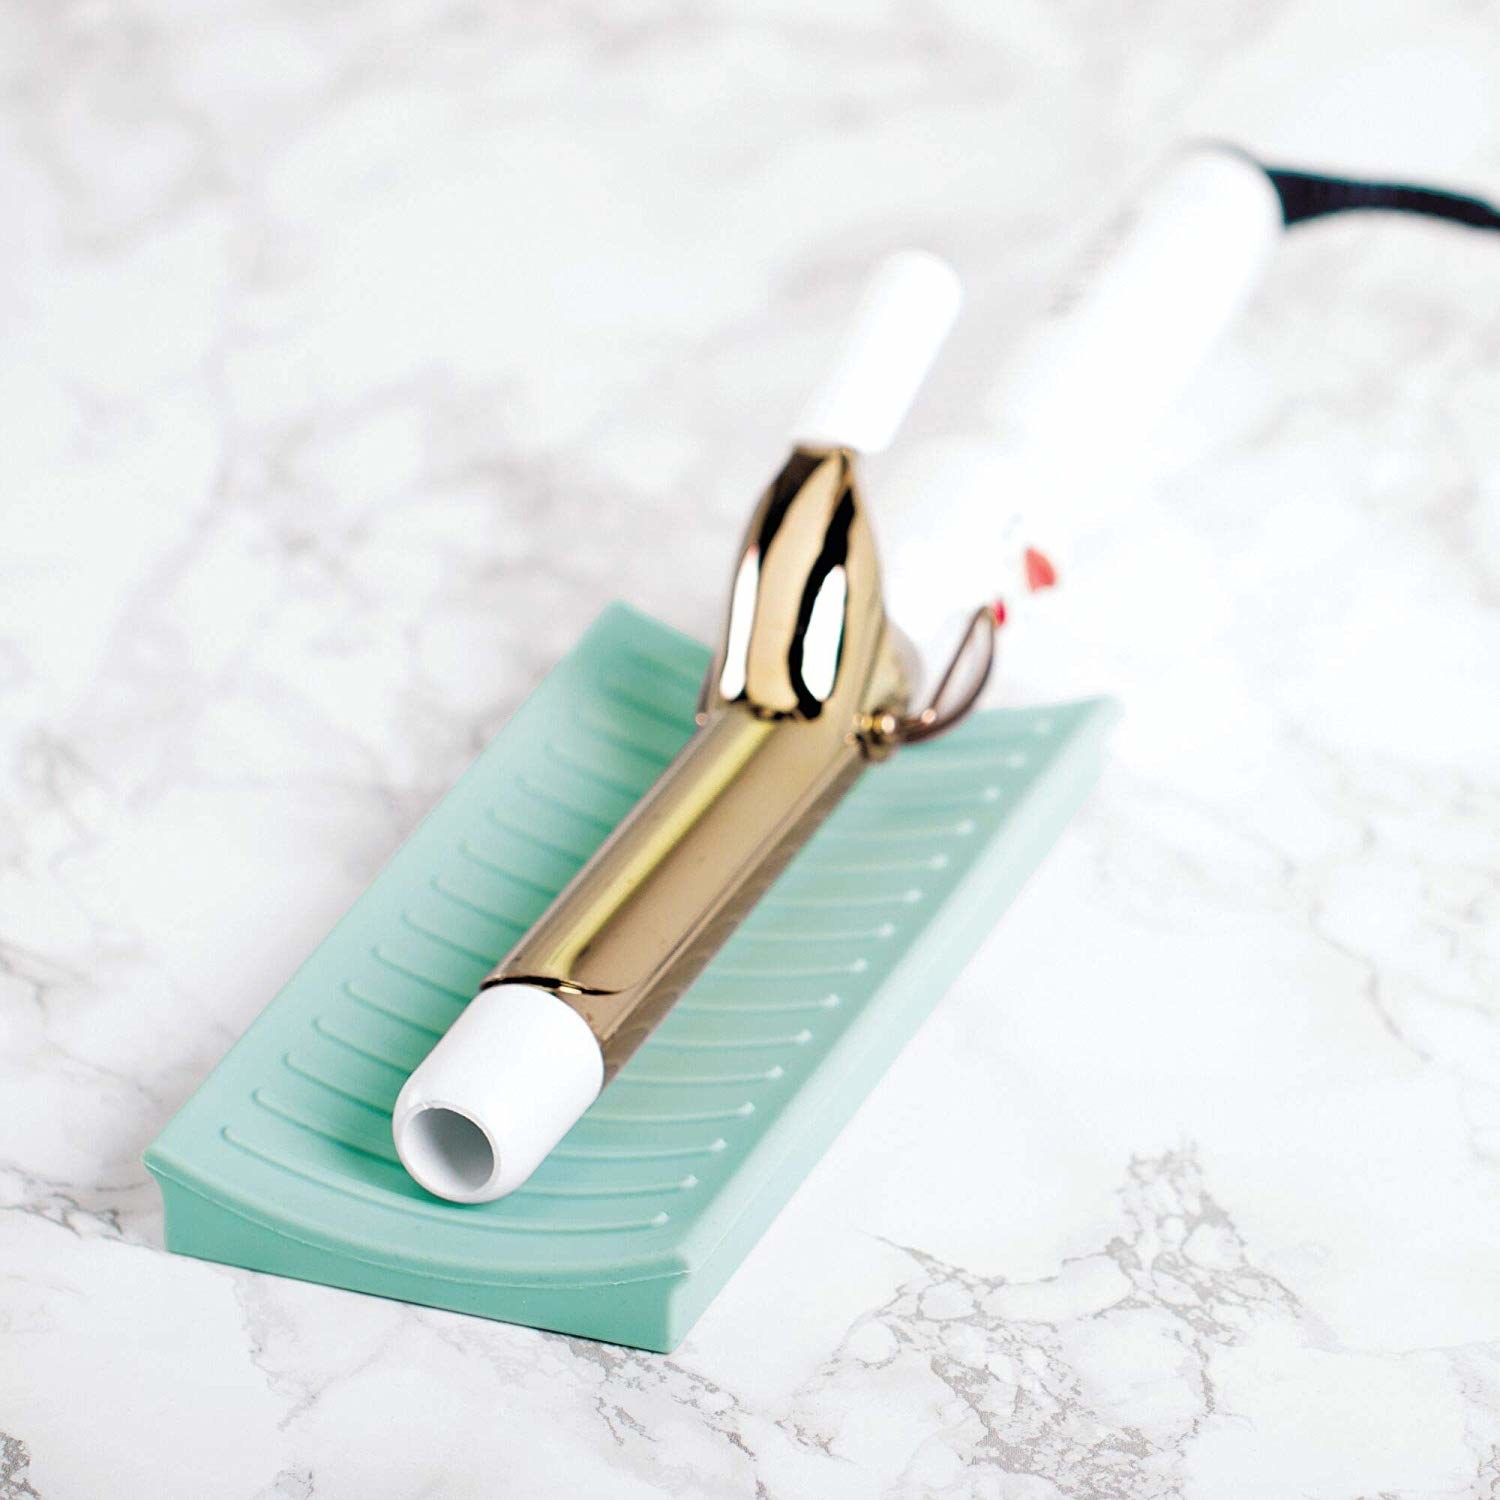 A curling iron on the mat